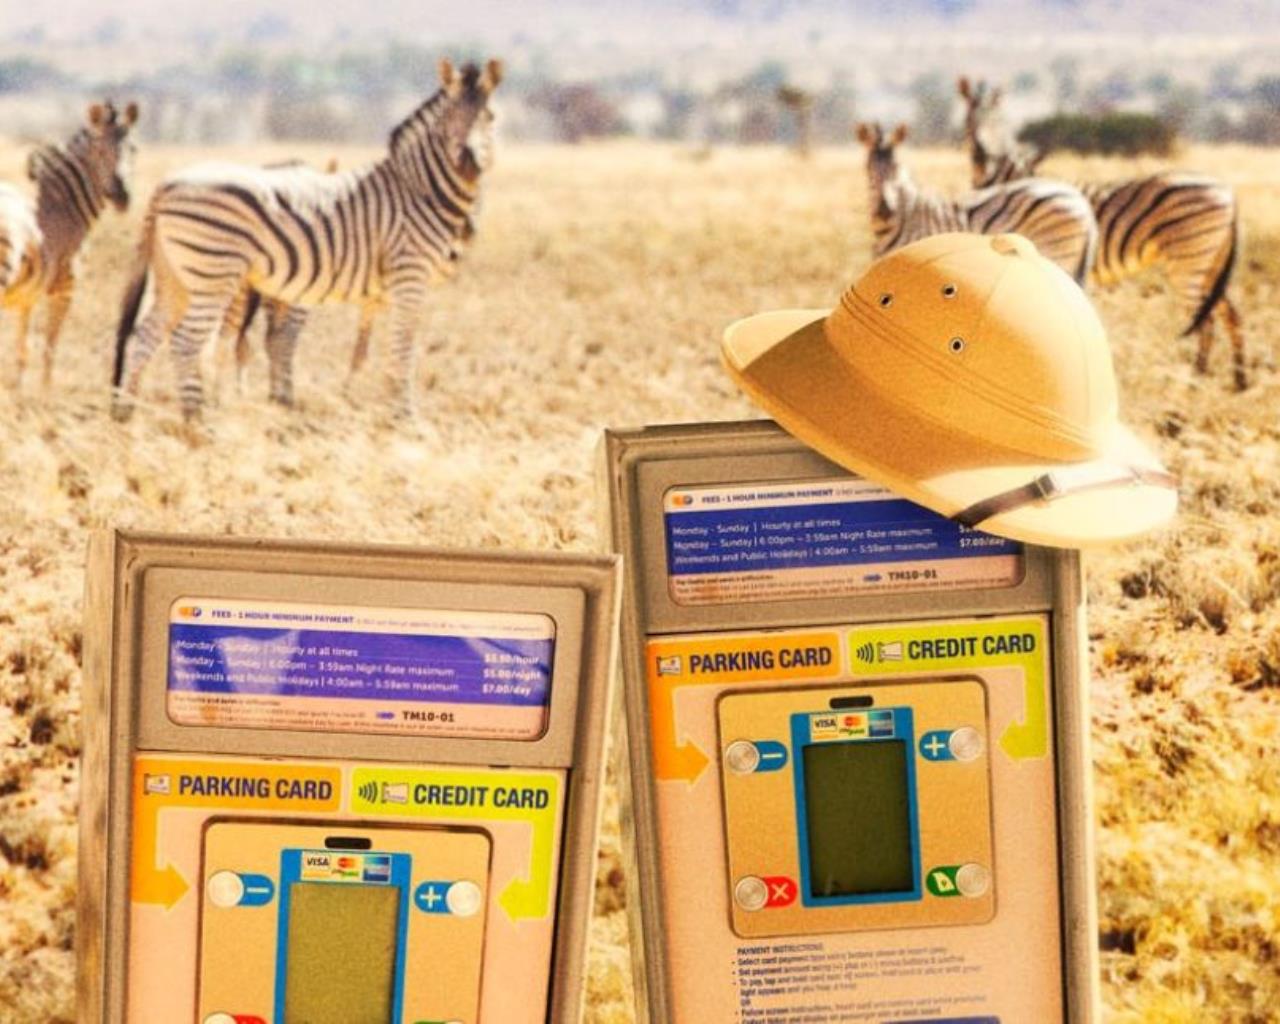 Composite image of parking meters on Safari in Africa for new parking campaign